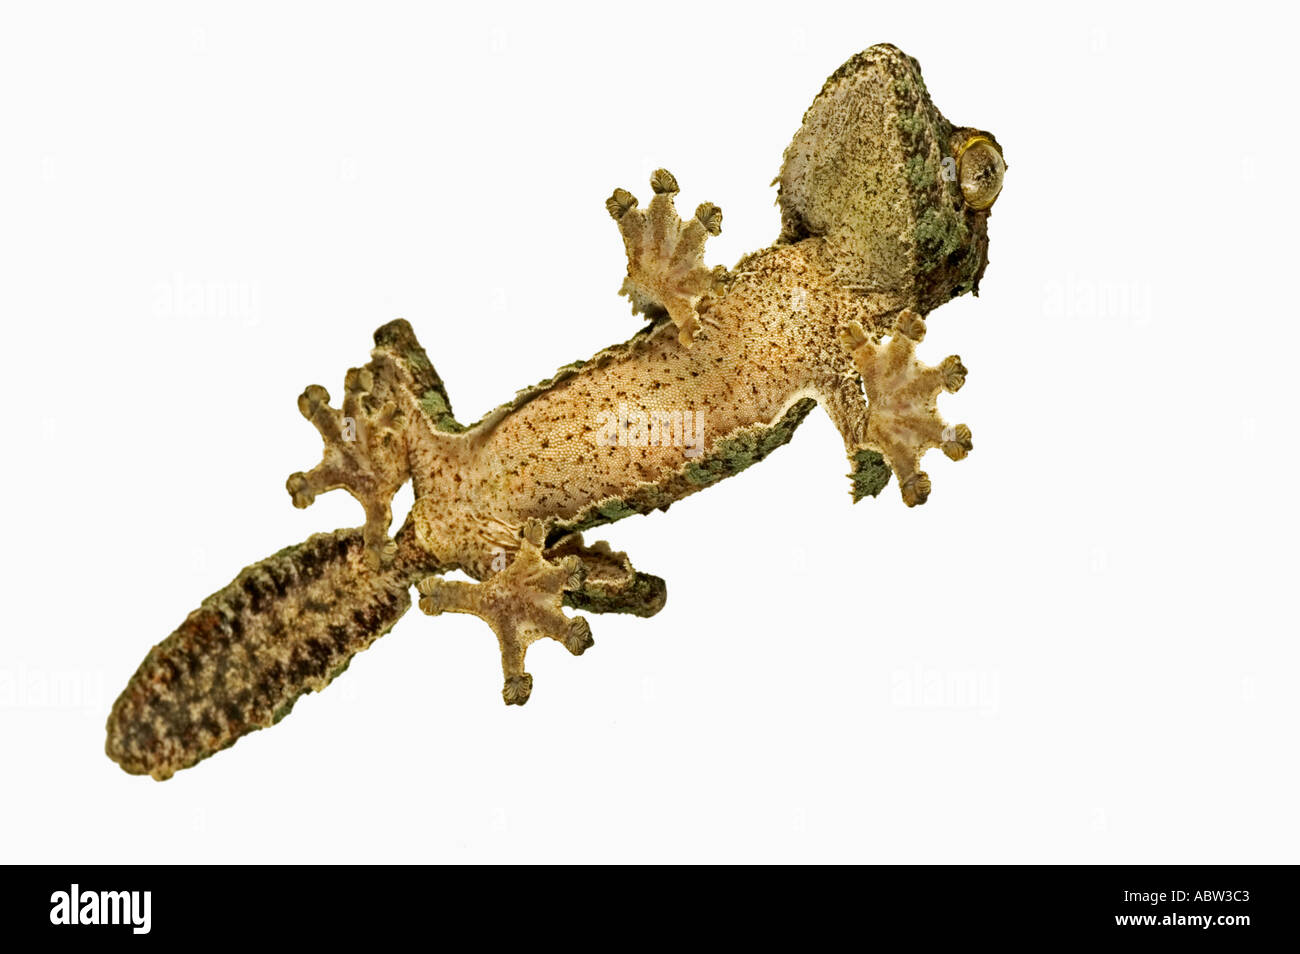 Fringed gecko Uroplatus henkeli View from below showing specially adapted feet Dist Madagascar Stock Photo